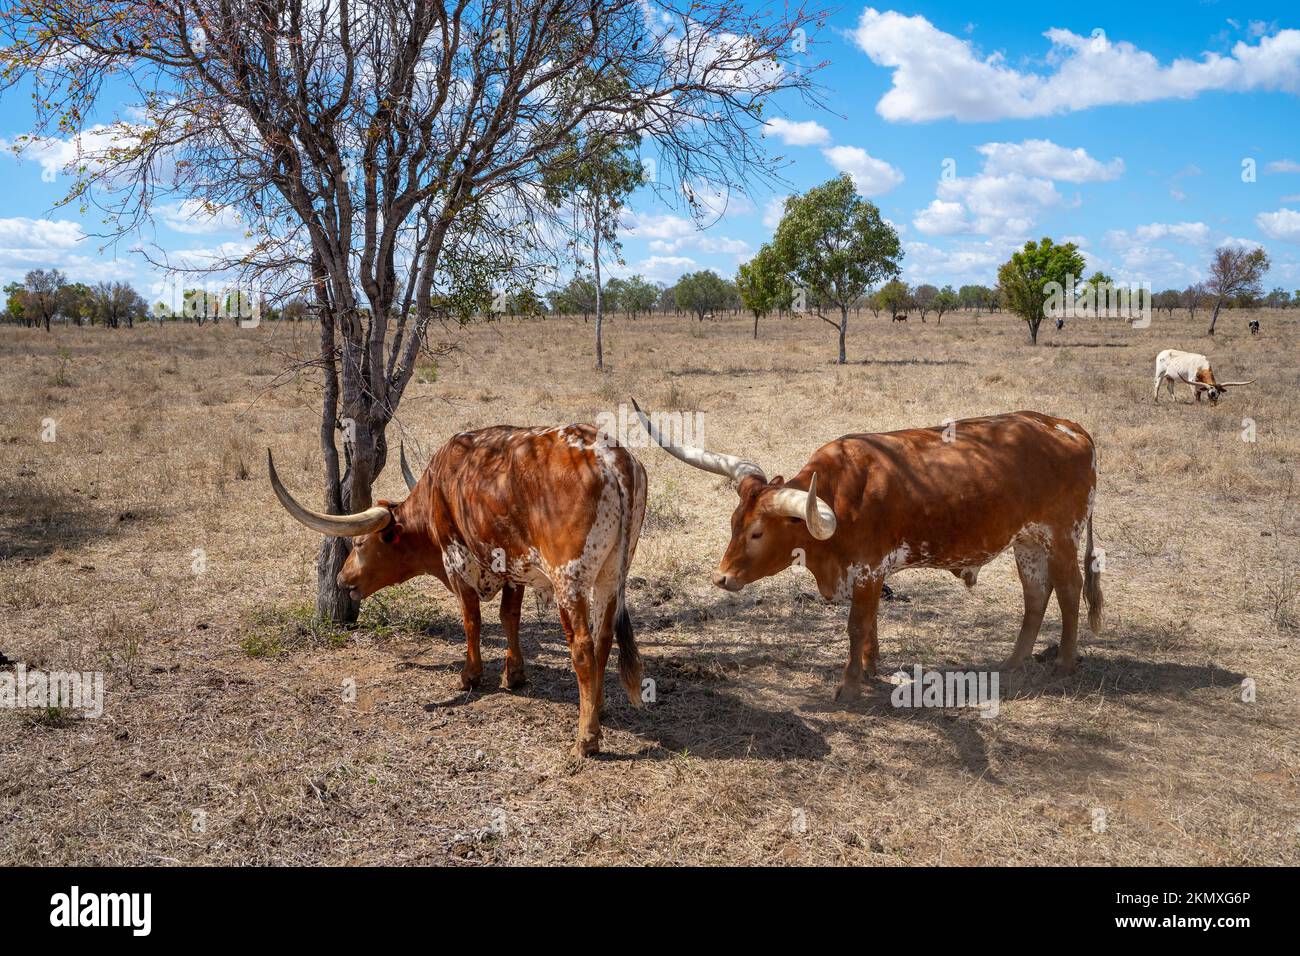 Texas Longhorn cattle standing in shade of a tree to escape summer heat. North Queensland Australia Stock Photo